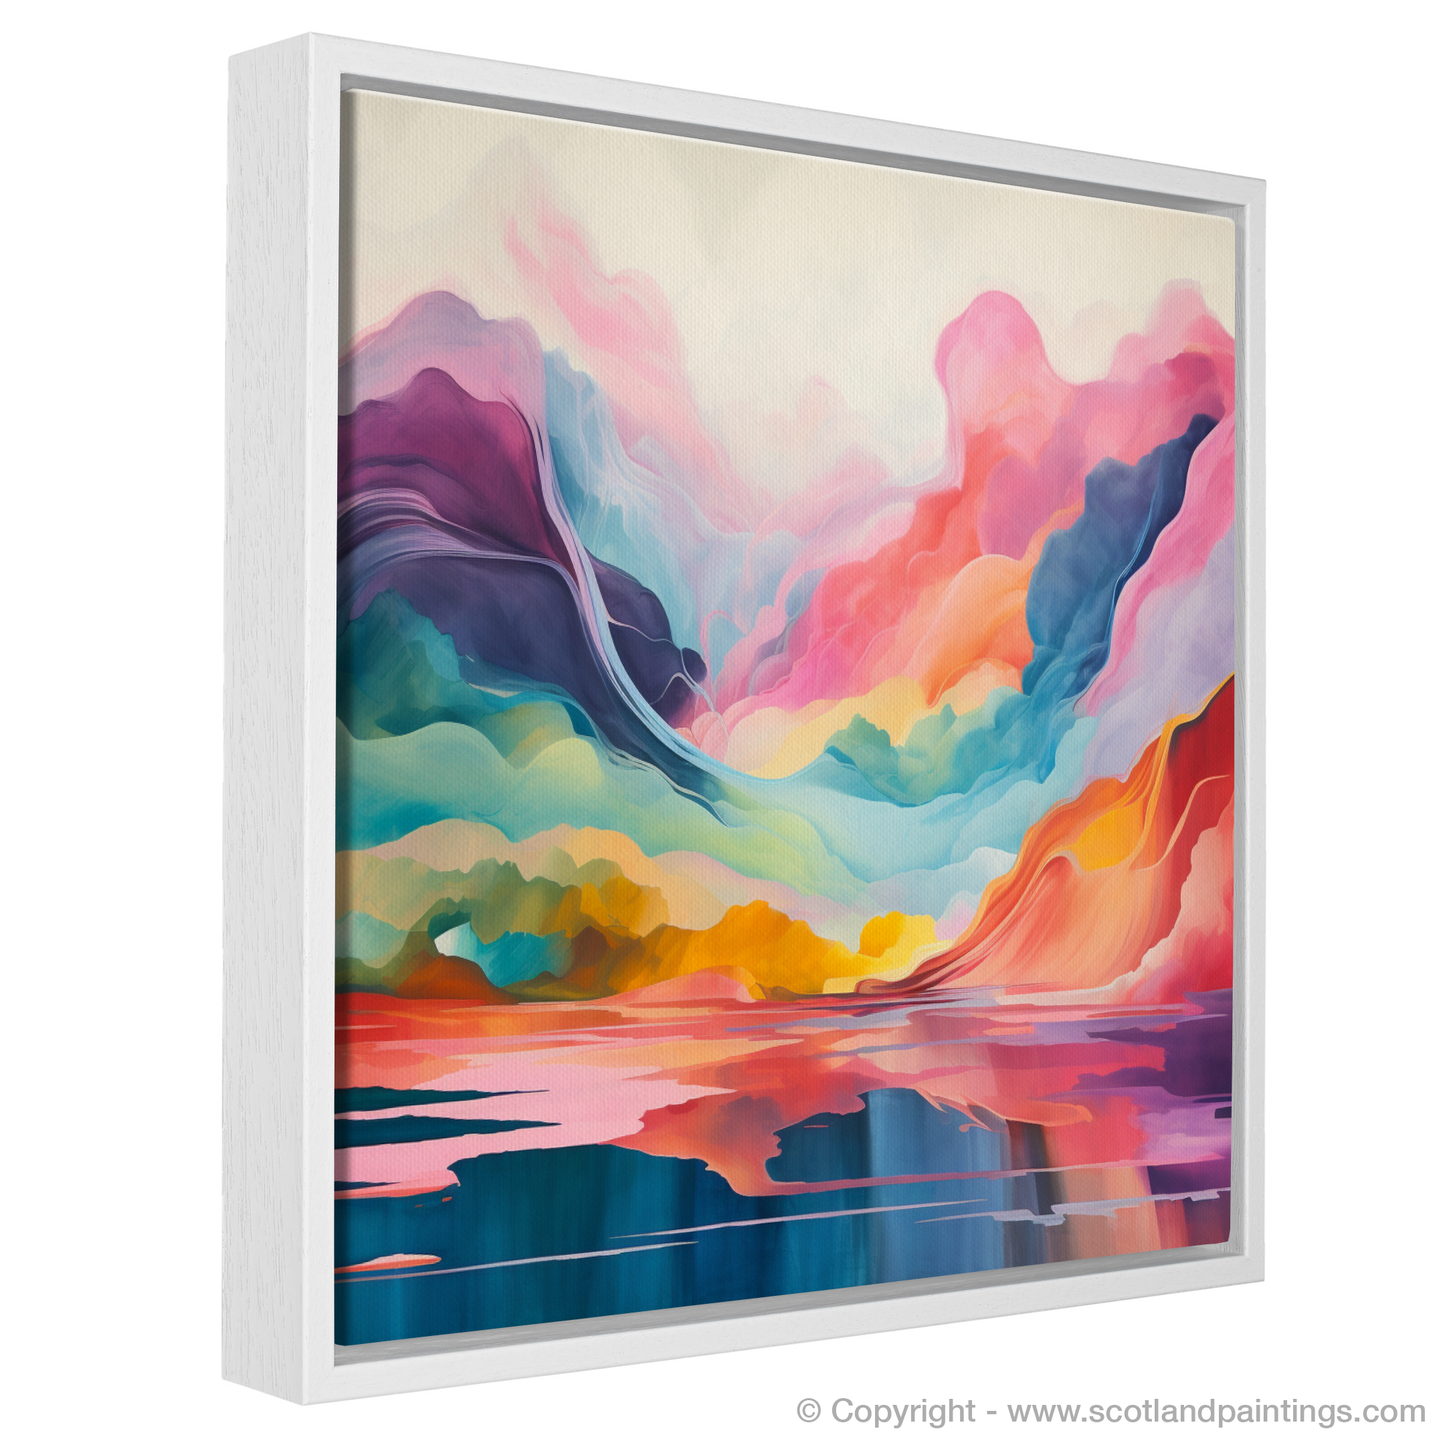 Painting and Art Print of Loch Lomond entitled "Vivid Loch Lomond: An Abstract Symphony".